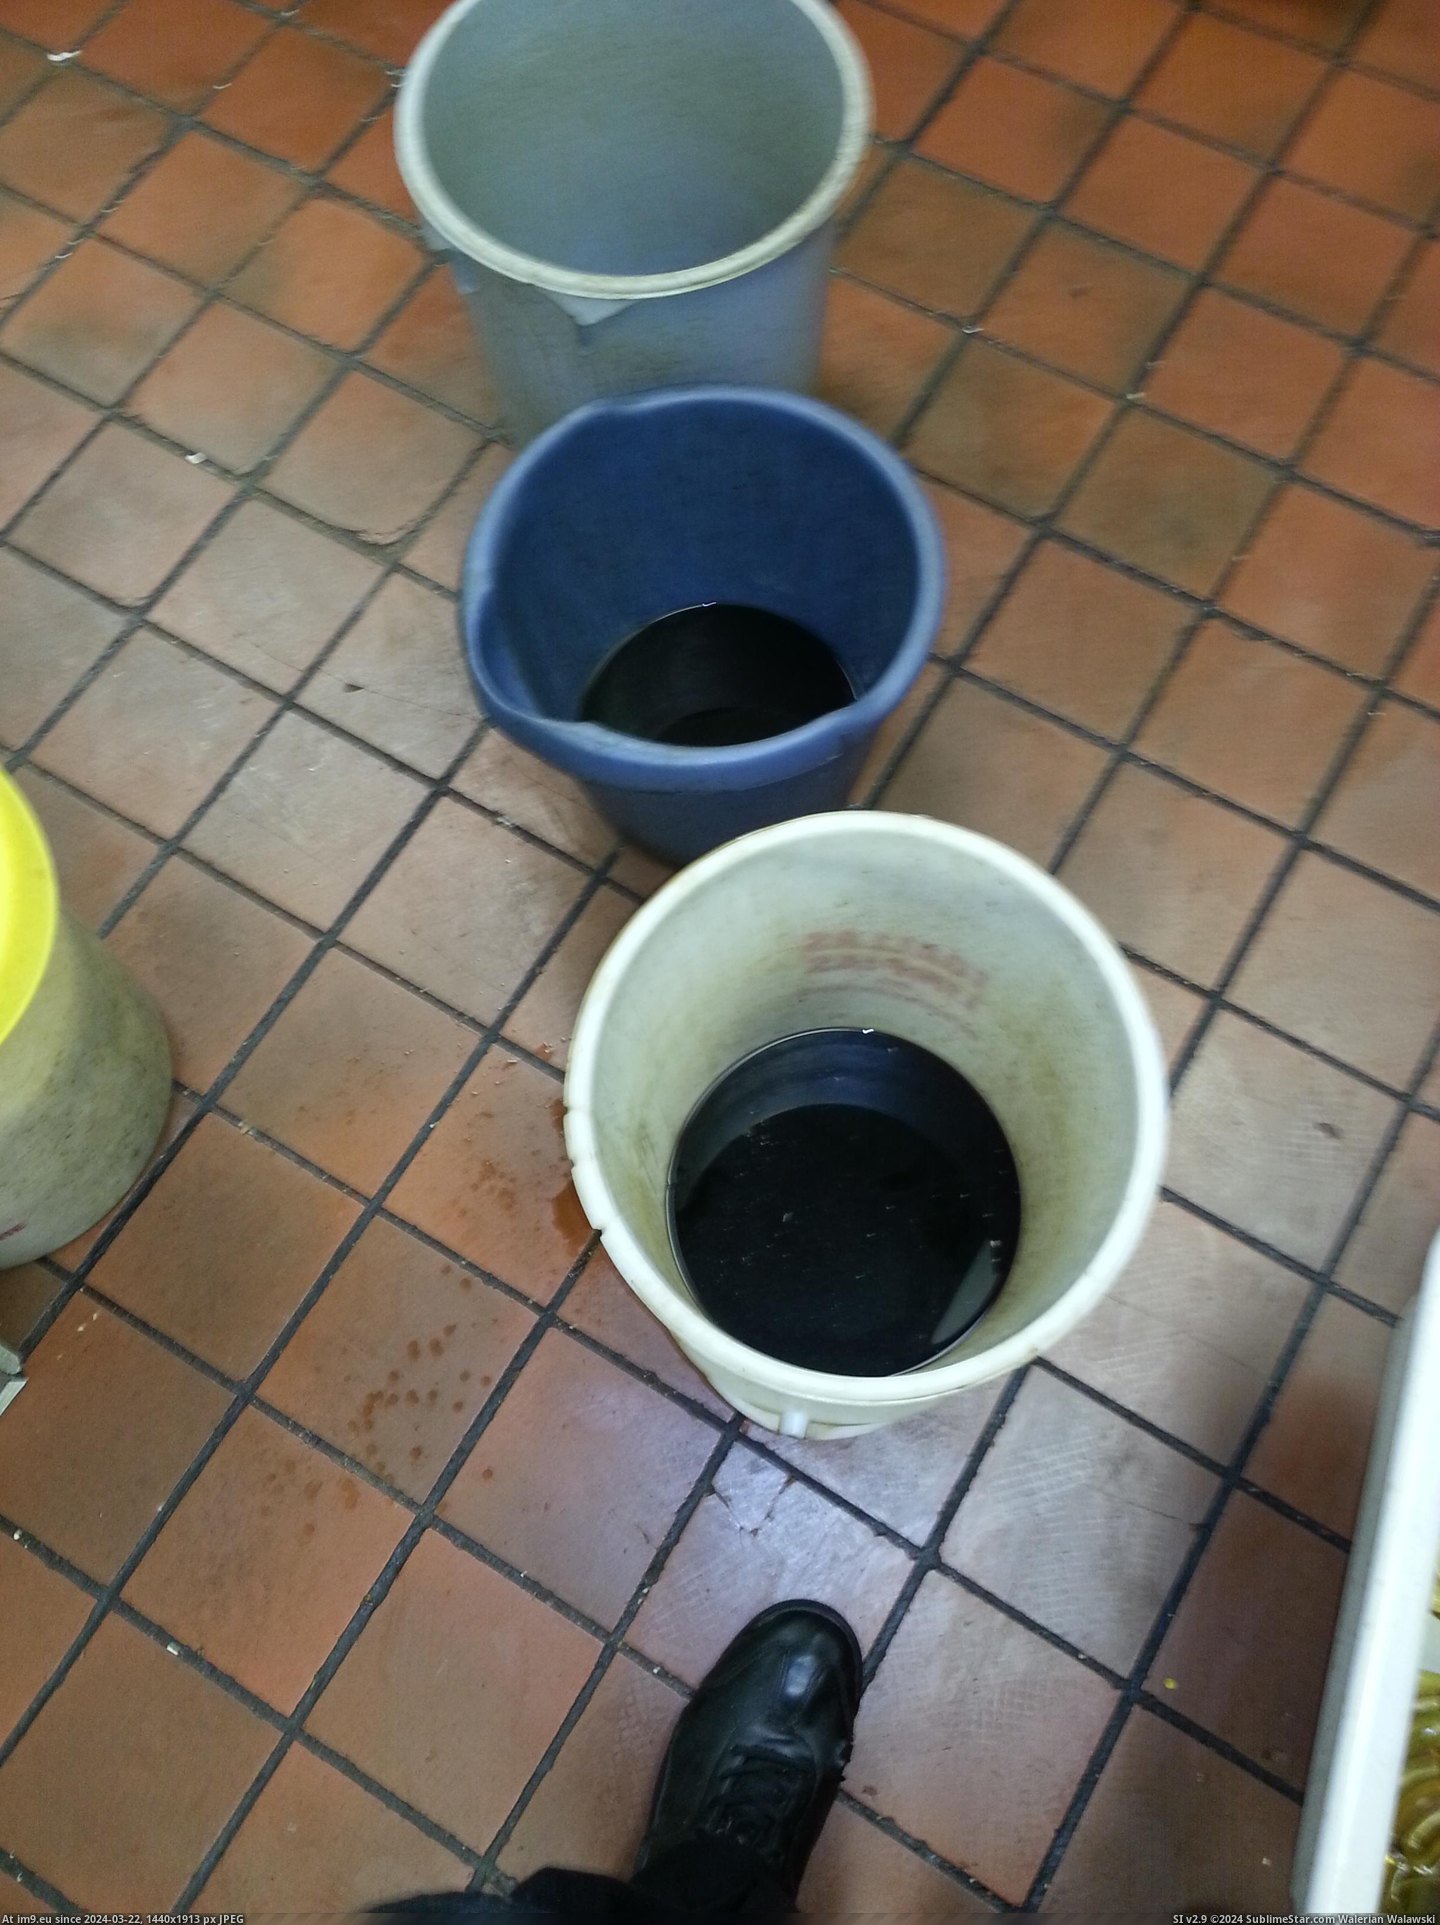 #Wtf #Black #Ceiling #Liquid #Leaking #Work #Mcdonald [Wtf] This black liquid is leaking from the ceiling at the McDonald's where I work. Pic. (Image of album My r/WTF favs))